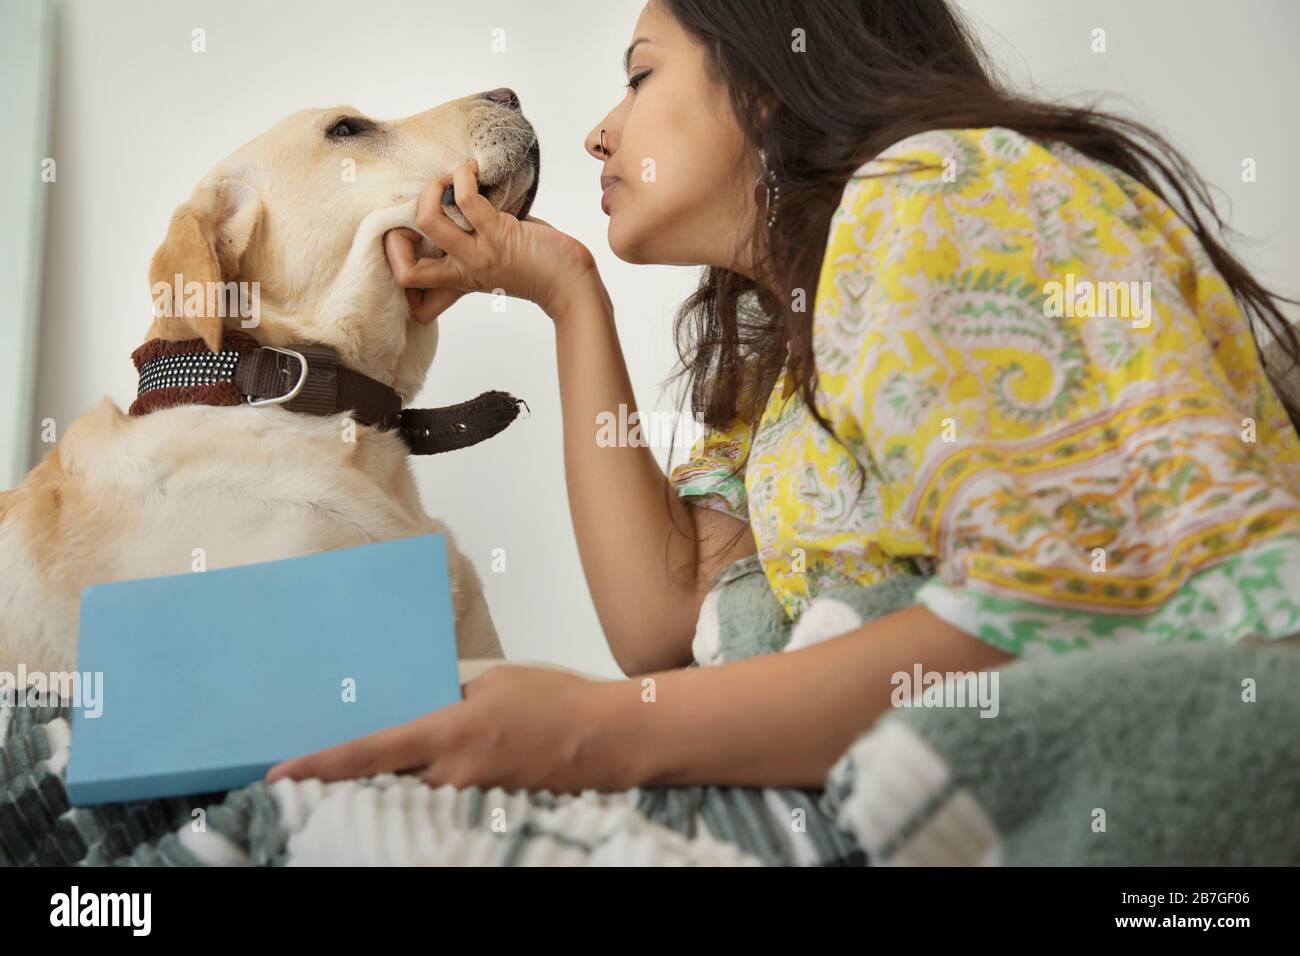 Woman sitting with a book in her hand while pampering her dog. Stock Photo